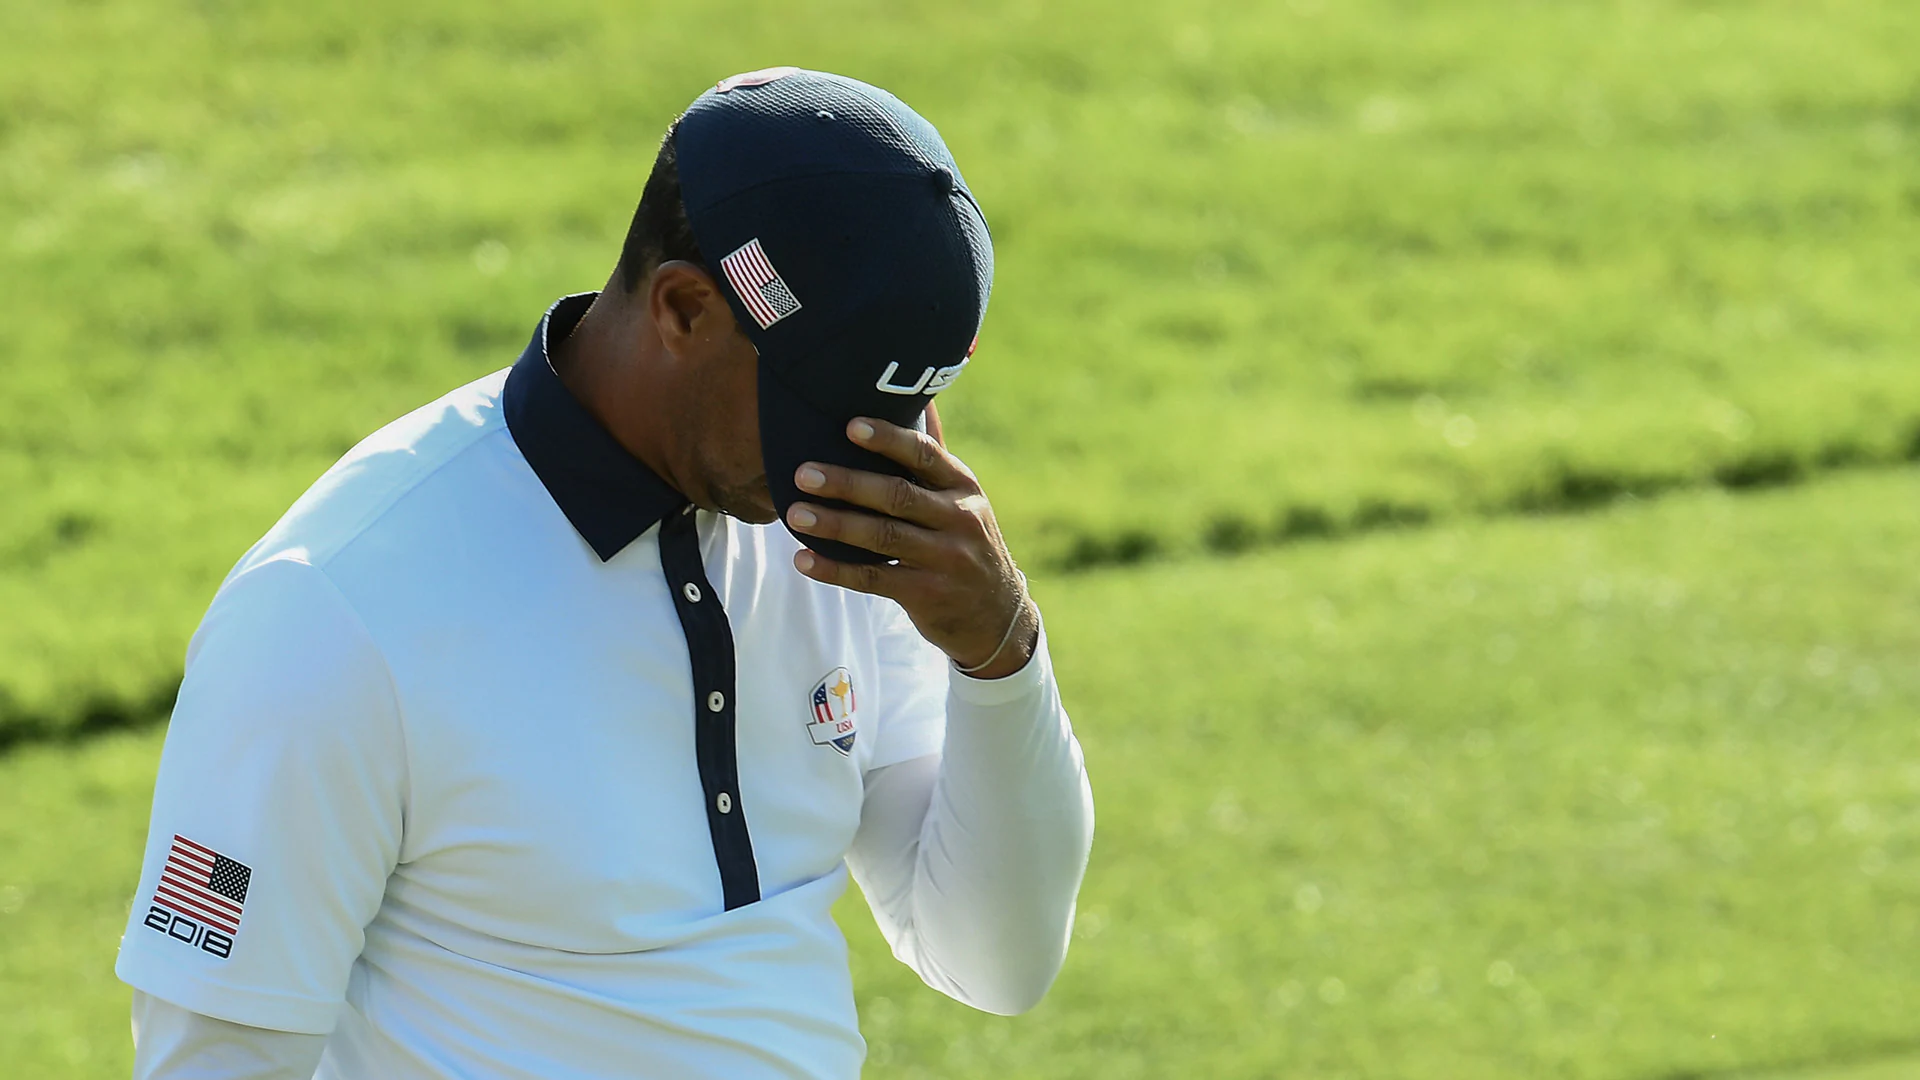 Woods 'pissed off' after going 0-3